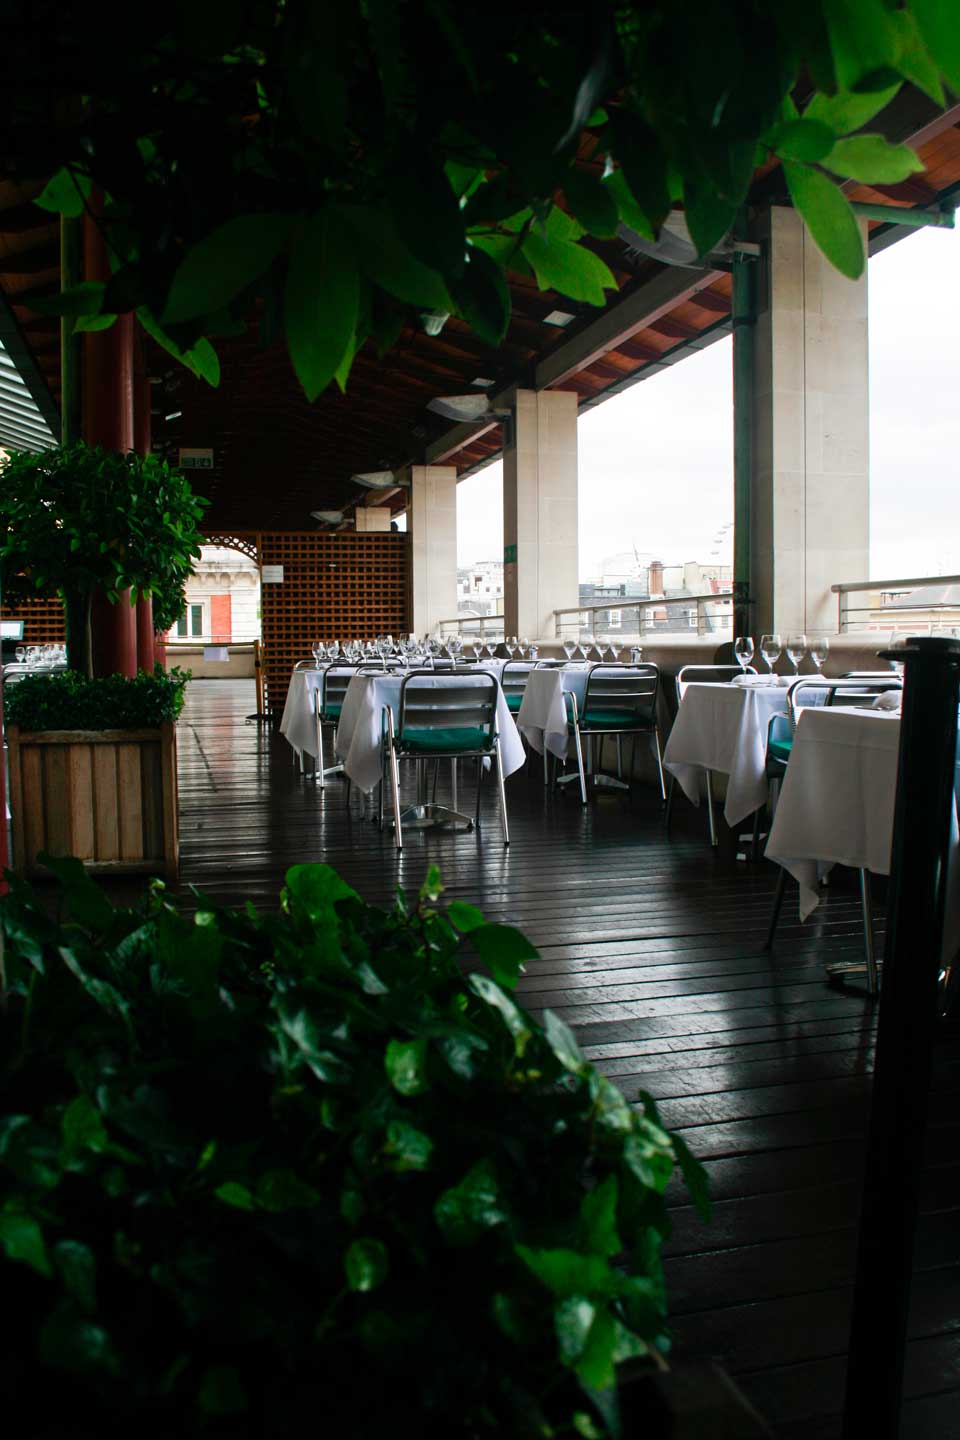 The terrace at the Royal Opera House by Lia Vittone.